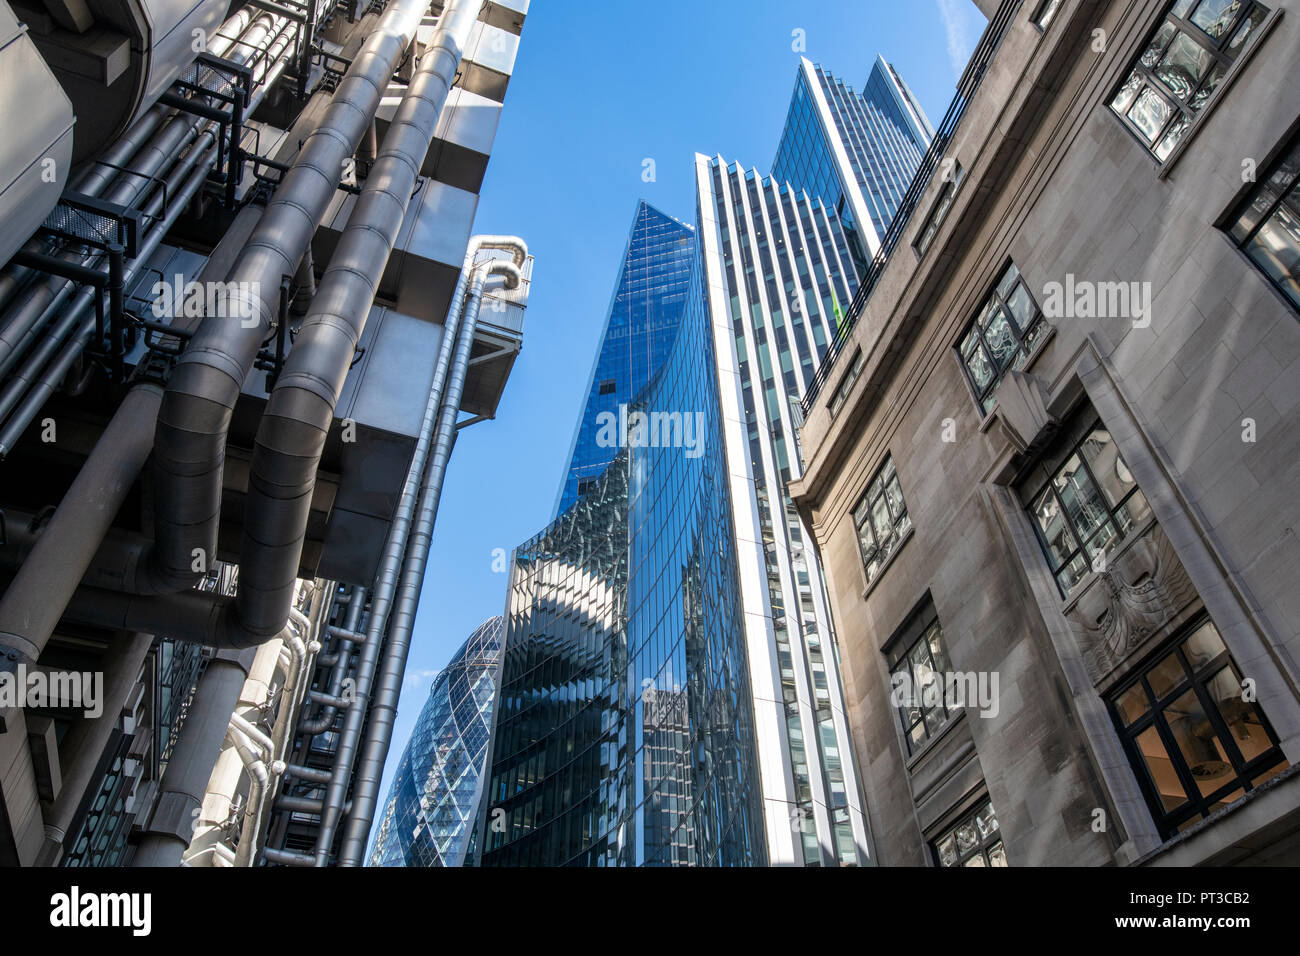 Willis building and Lloyds building abstract. Lime Street. London, England Stock Photo